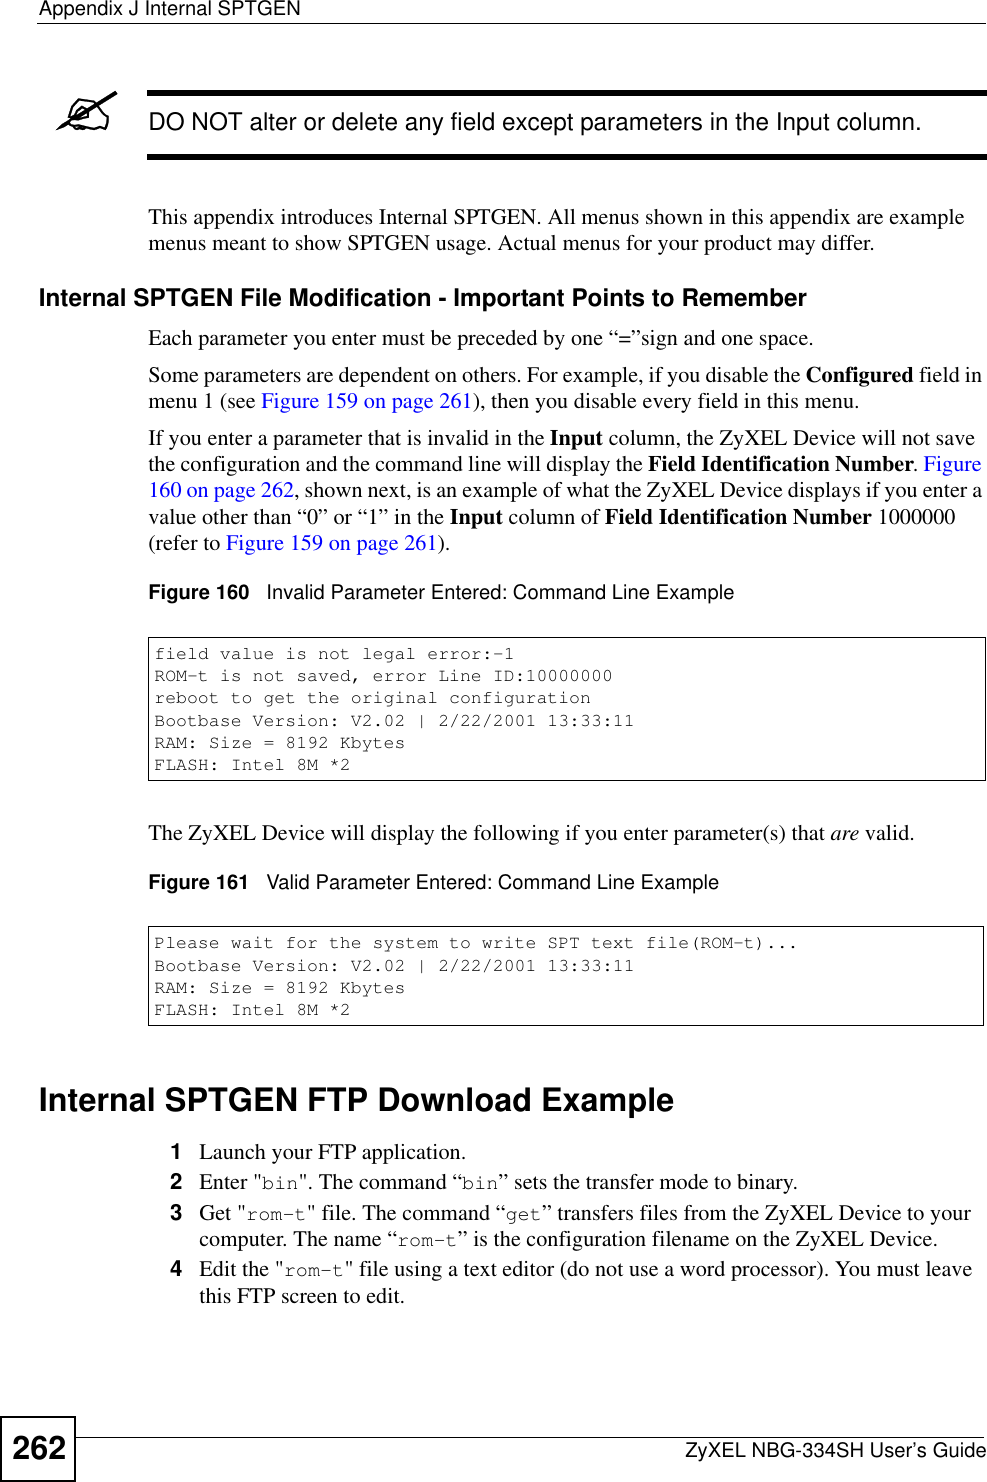 Appendix J Internal SPTGENZyXEL NBG-334SH User’s Guide262&quot;DO NOT alter or delete any field except parameters in the Input column. This appendix introduces Internal SPTGEN. All menus shown in this appendix are example menus meant to show SPTGEN usage. Actual menus for your product may differ.Internal SPTGEN File Modification - Important Points to RememberEach parameter you enter must be preceded by one “=”sign and one space.Some parameters are dependent on others. For example, if you disable the Configured field in menu 1 (see Figure 159 on page 261), then you disable every field in this menu.If you enter a parameter that is invalid in the Input column, the ZyXEL Device will not save the configuration and the command line will display the Field Identification Number.Figure160 on page 262, shown next, is an example of what the ZyXEL Device displays if you enter a value other than “0” or “1” in the Input column of Field Identification Number 1000000 (refer to Figure 159 on page 261).Figure 160   Invalid Parameter Entered: Command Line ExampleThe ZyXEL Device will display the following if you enter parameter(s) that are valid.Figure 161   Valid Parameter Entered: Command Line ExampleInternal SPTGEN FTP Download Example1Launch your FTP application.2Enter &quot;bin&quot;. The command “bin” sets the transfer mode to binary.3Get &quot;rom-t&quot; file. The command “get” transfers files from the ZyXEL Device to your computer. The name “rom-t” is the configuration filename on the ZyXEL Device.4Edit the &quot;rom-t&quot; file using a text editor (do not use a word processor). You must leave this FTP screen to edit.field value is not legal error:-1ROM-t is not saved, error Line ID:10000000reboot to get the original configurationBootbase Version: V2.02 | 2/22/2001 13:33:11RAM: Size = 8192 KbytesFLASH: Intel 8M *2Please wait for the system to write SPT text file(ROM-t)...Bootbase Version: V2.02 | 2/22/2001 13:33:11RAM: Size = 8192 KbytesFLASH: Intel 8M *2